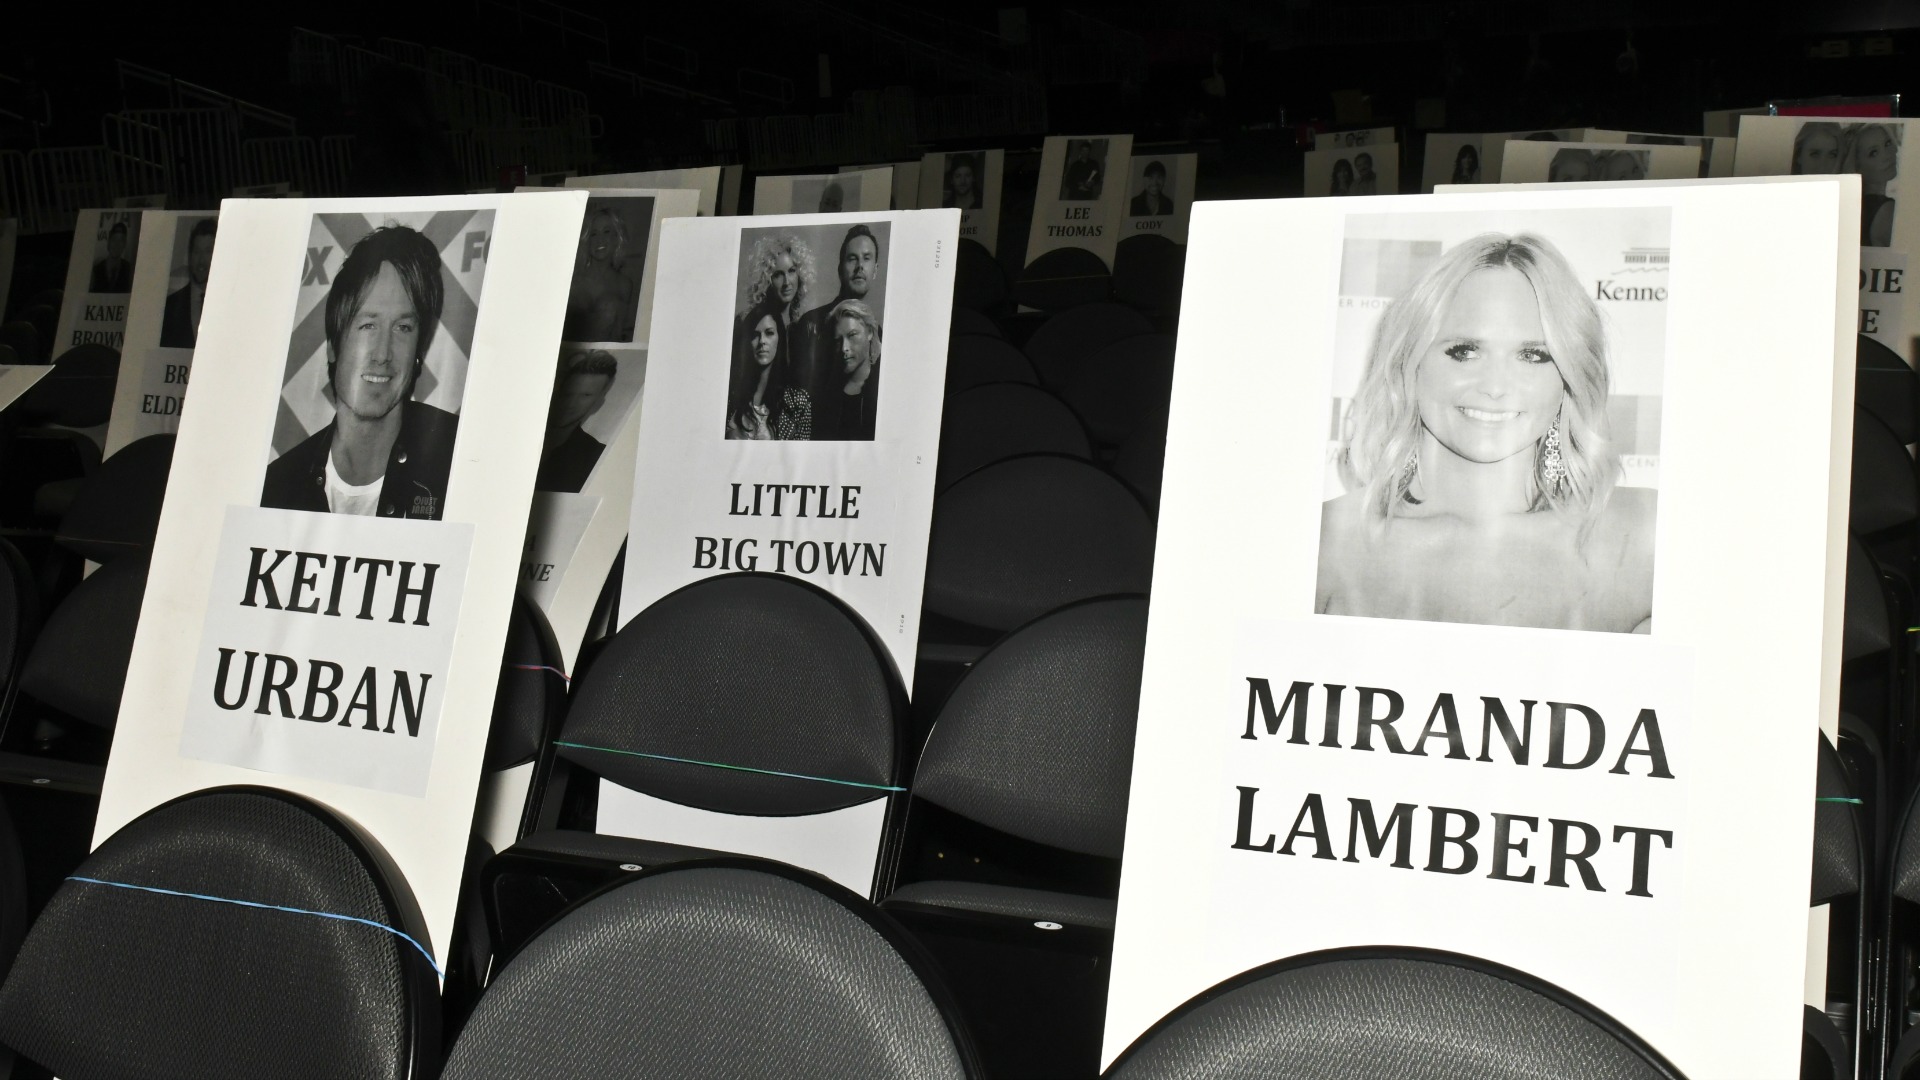 Wonder what legends Keith Urban and Miranda Lambert will talk about during the ceremony!